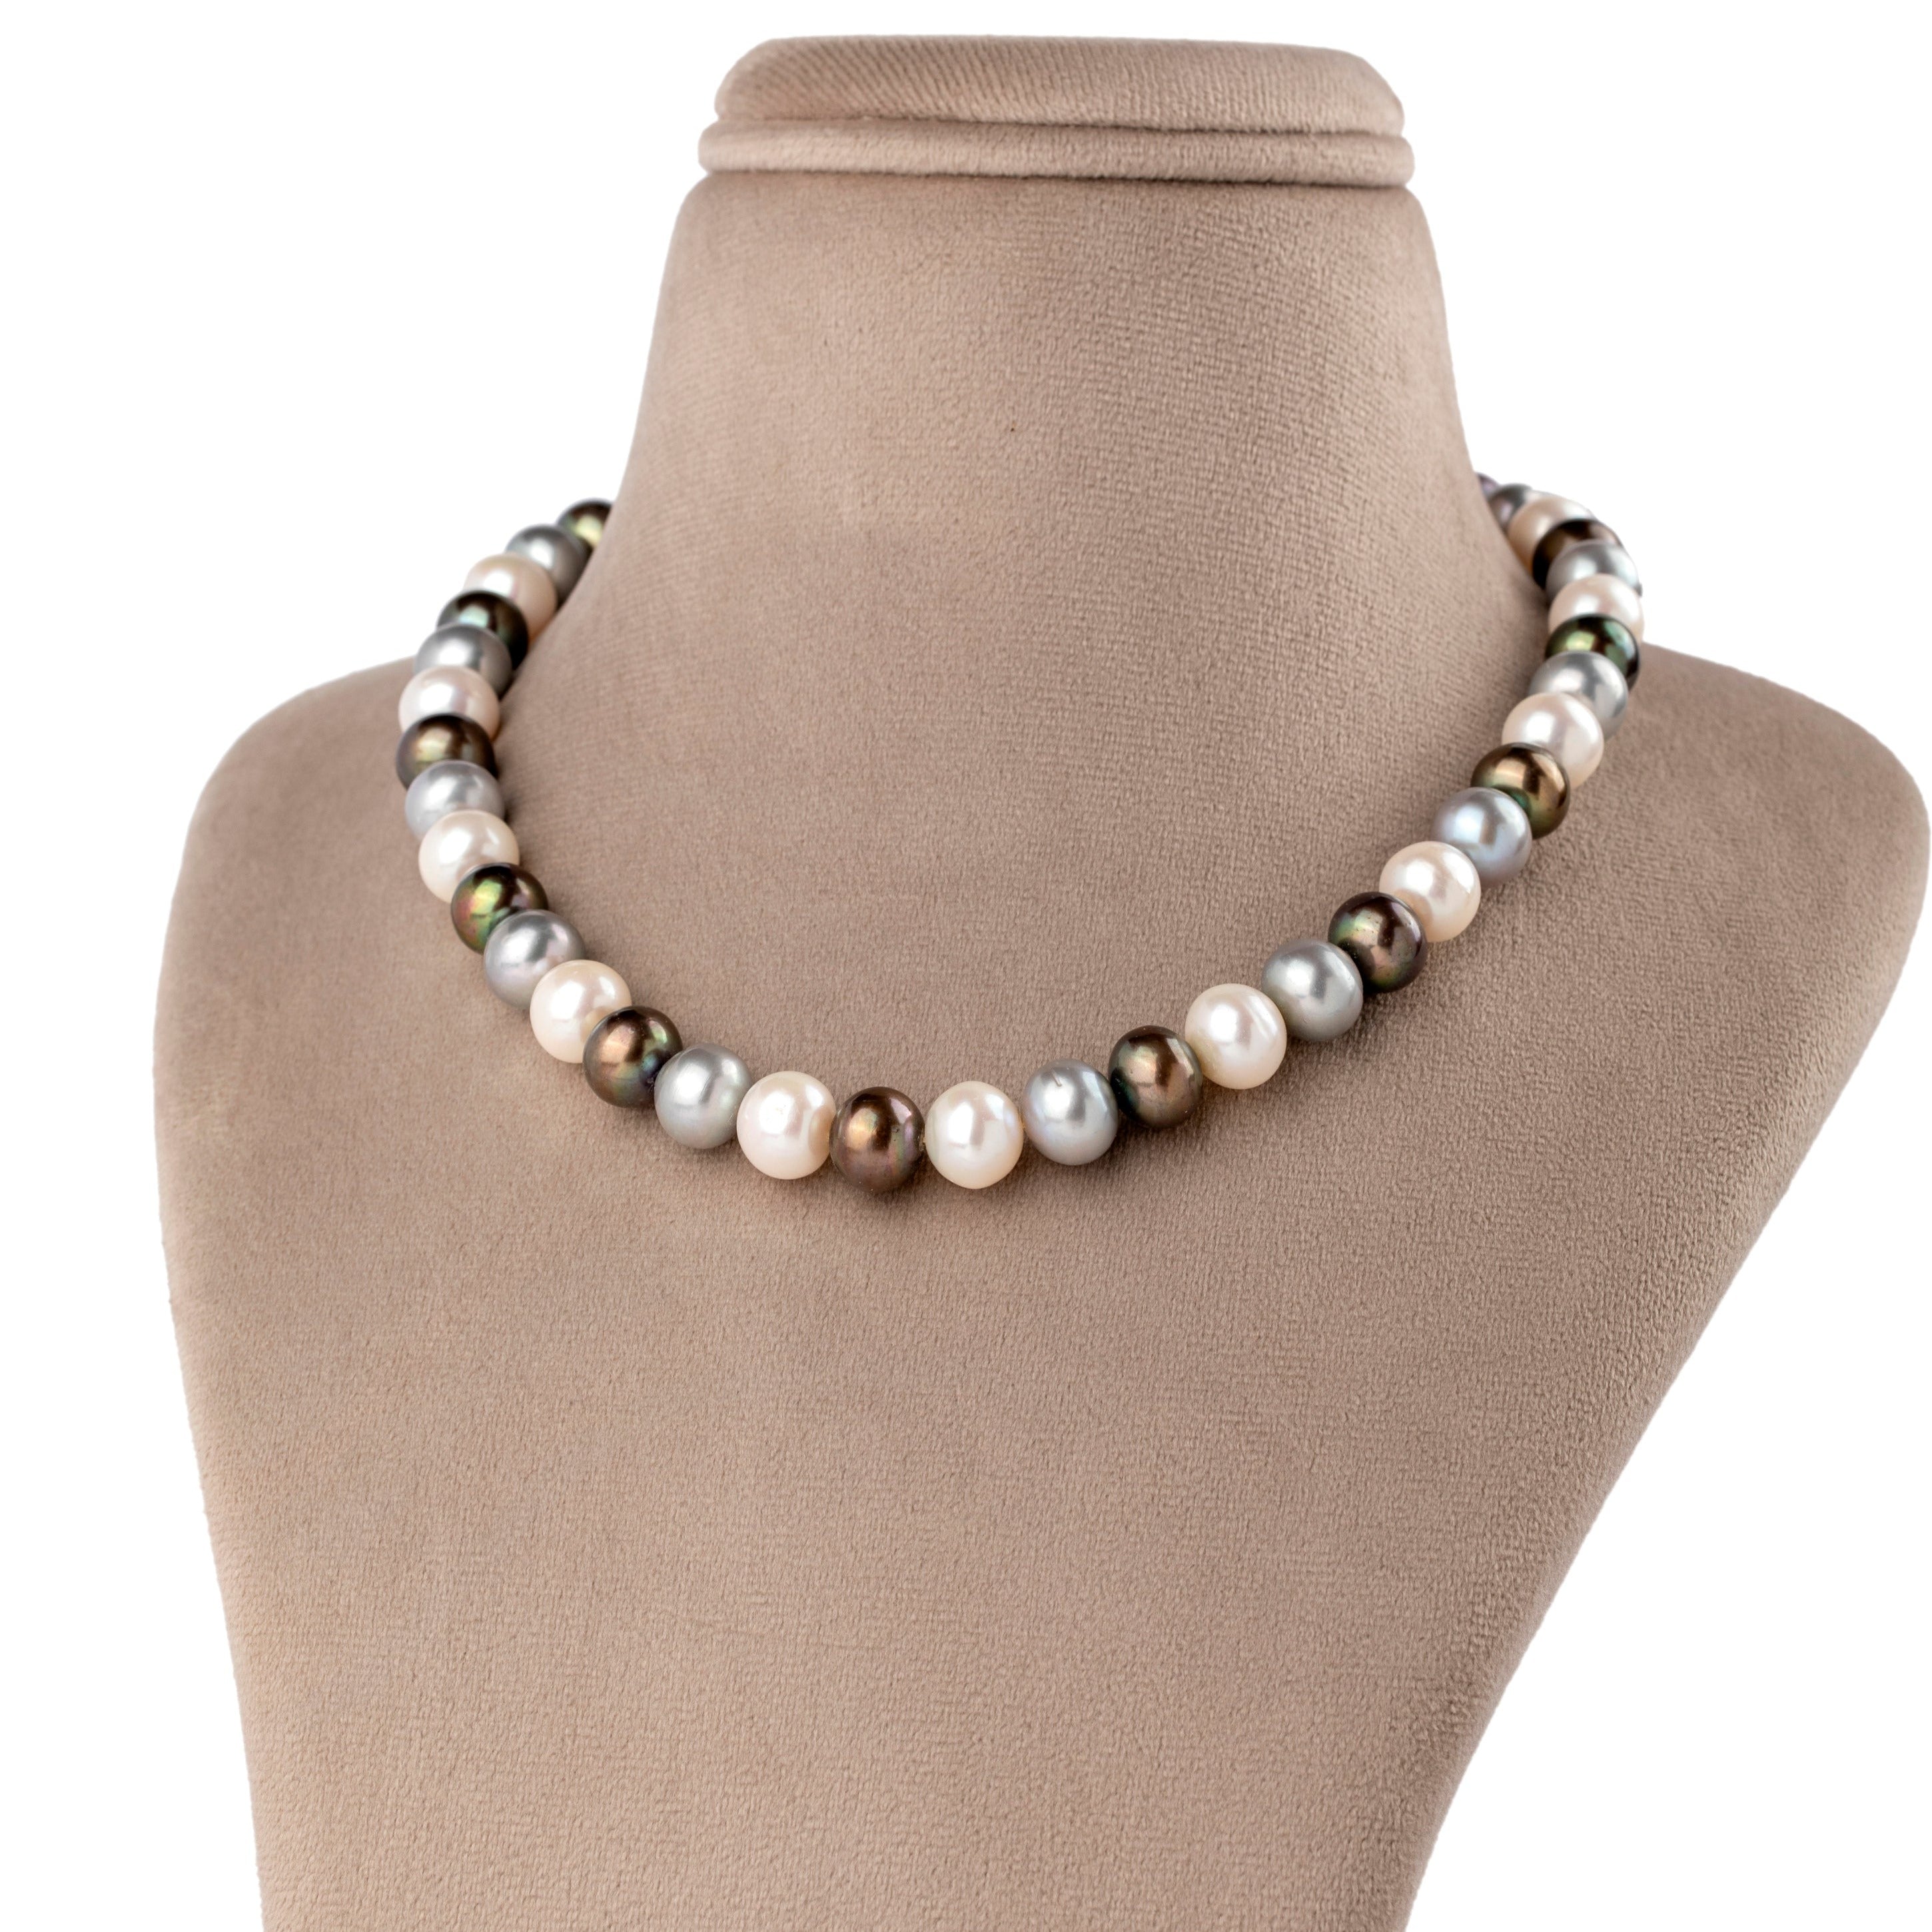 TreasureBay MultiColor Multi-strand Freshwater Pearl Twisted Necklace : Buy  Online at Best Price in KSA - Souq is now Amazon.sa: Fashion